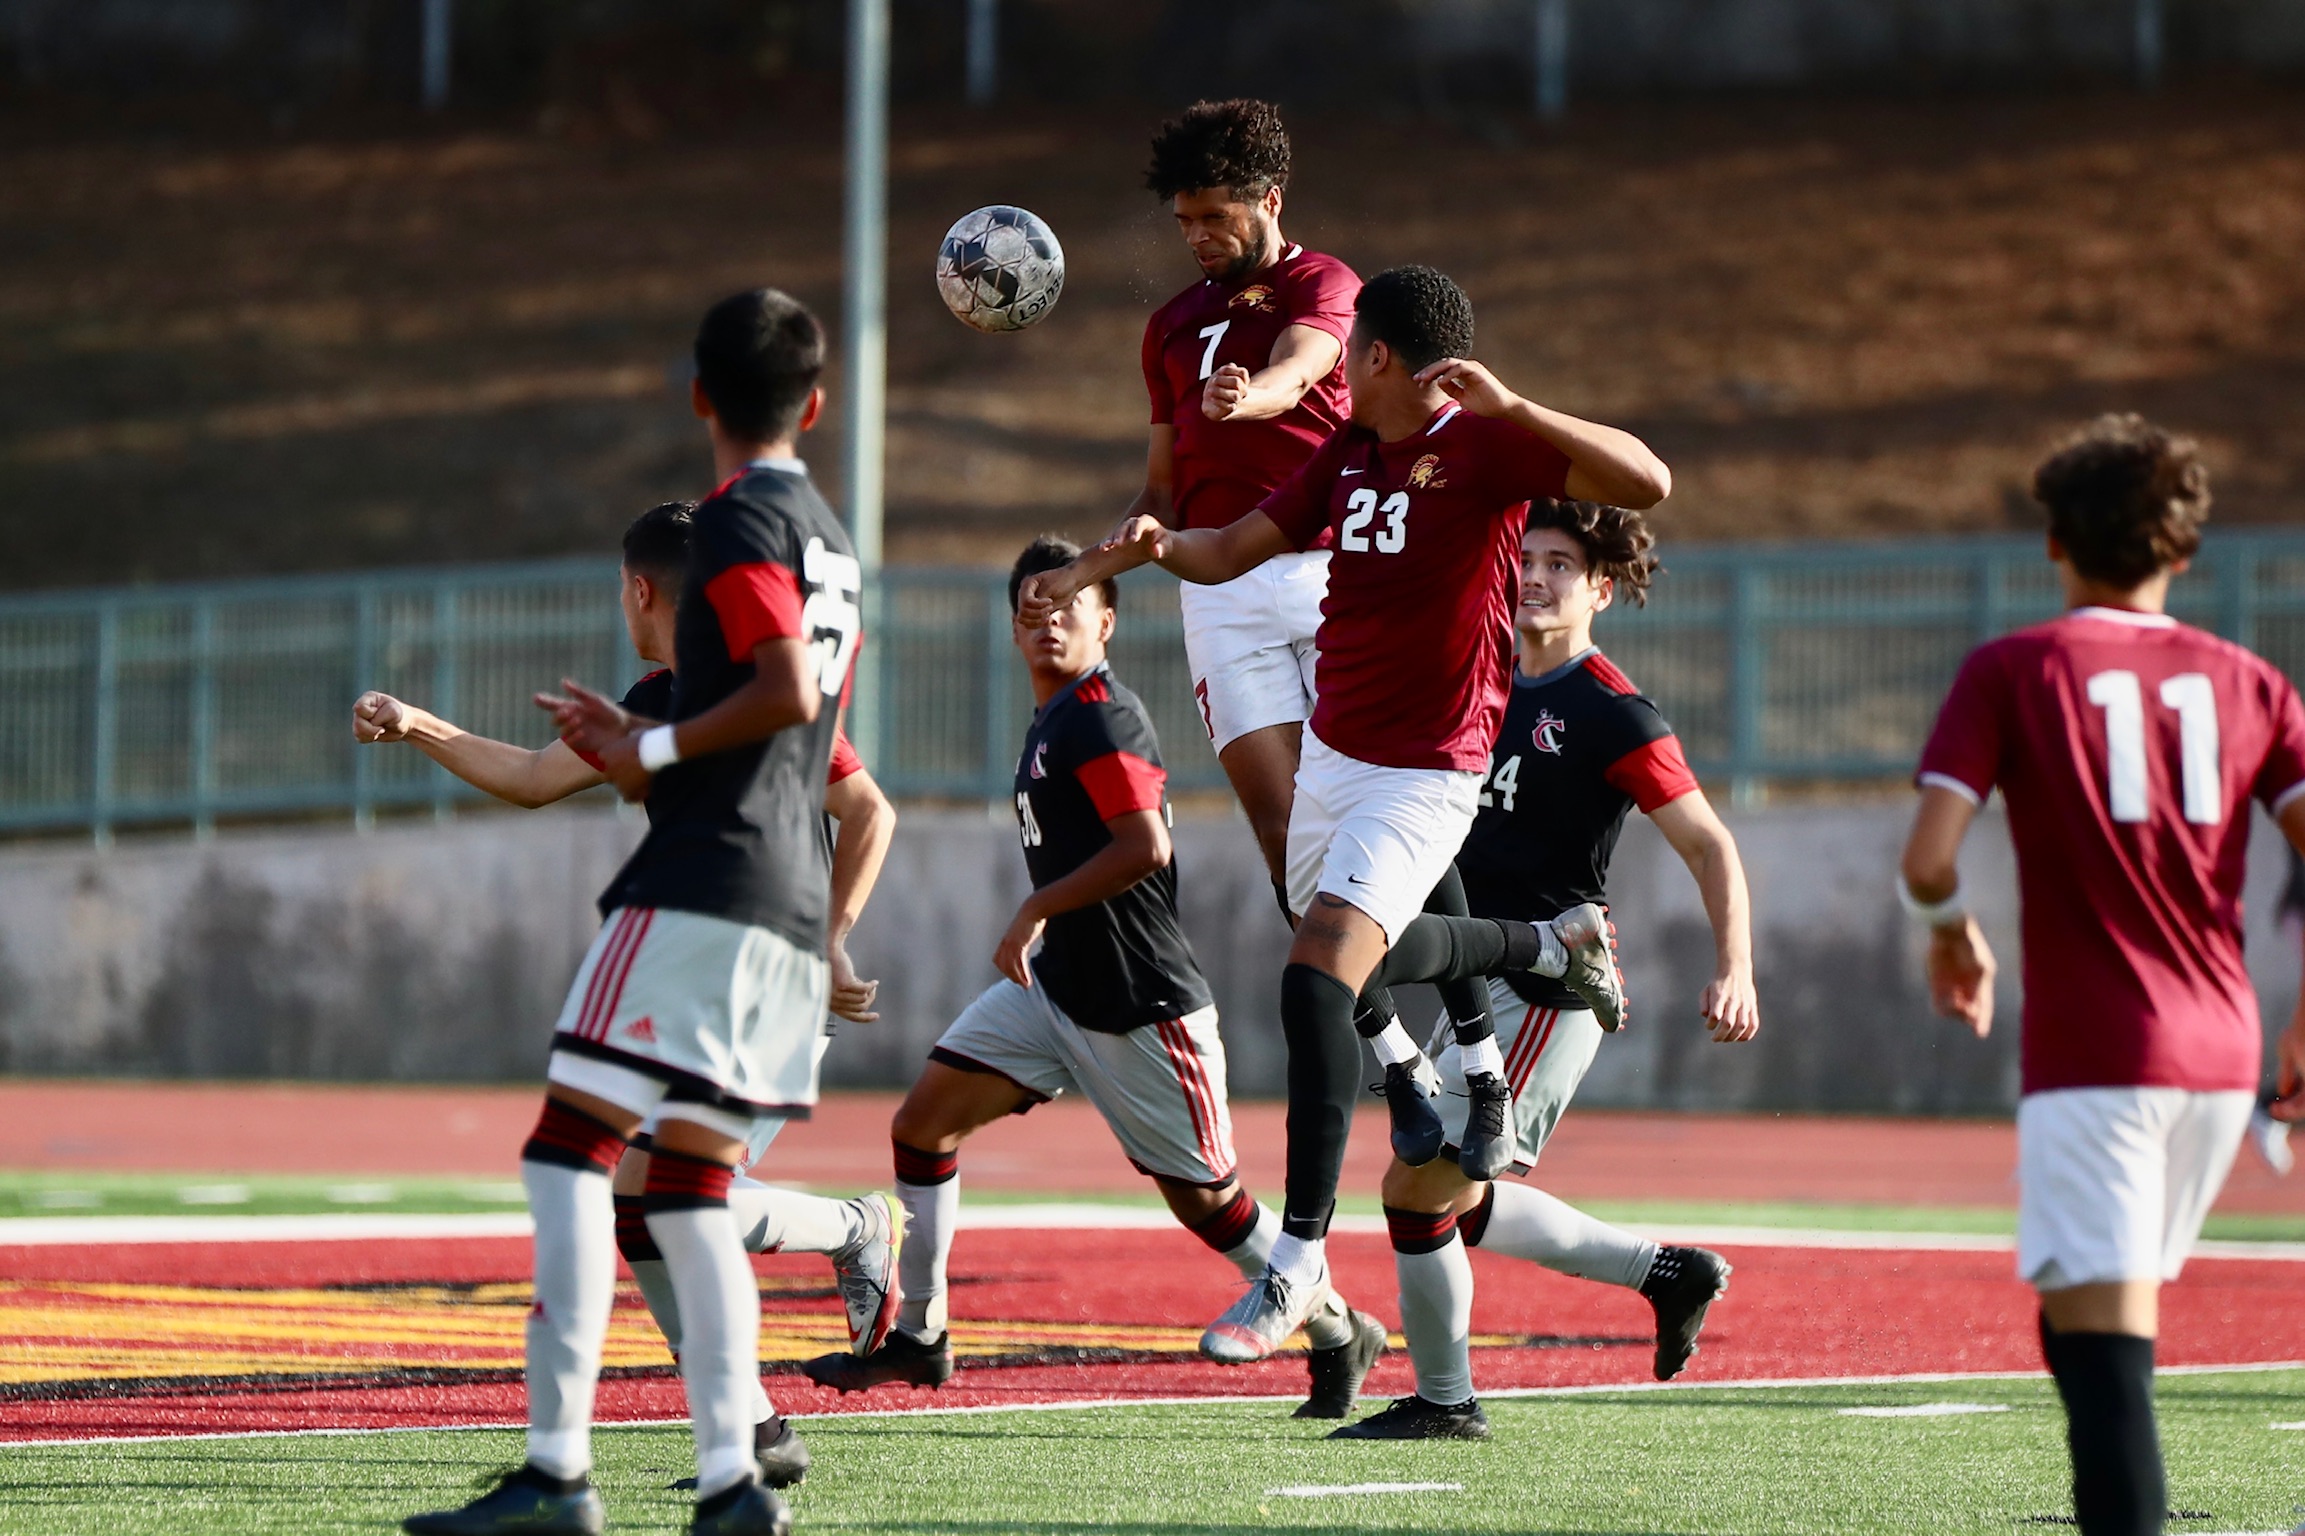 Asher Smith heads in what what proved to be the final PCC goal of the season on Tuesday with teammate Cameron Montano (#23) also in flight (photo by Michael Watkins).